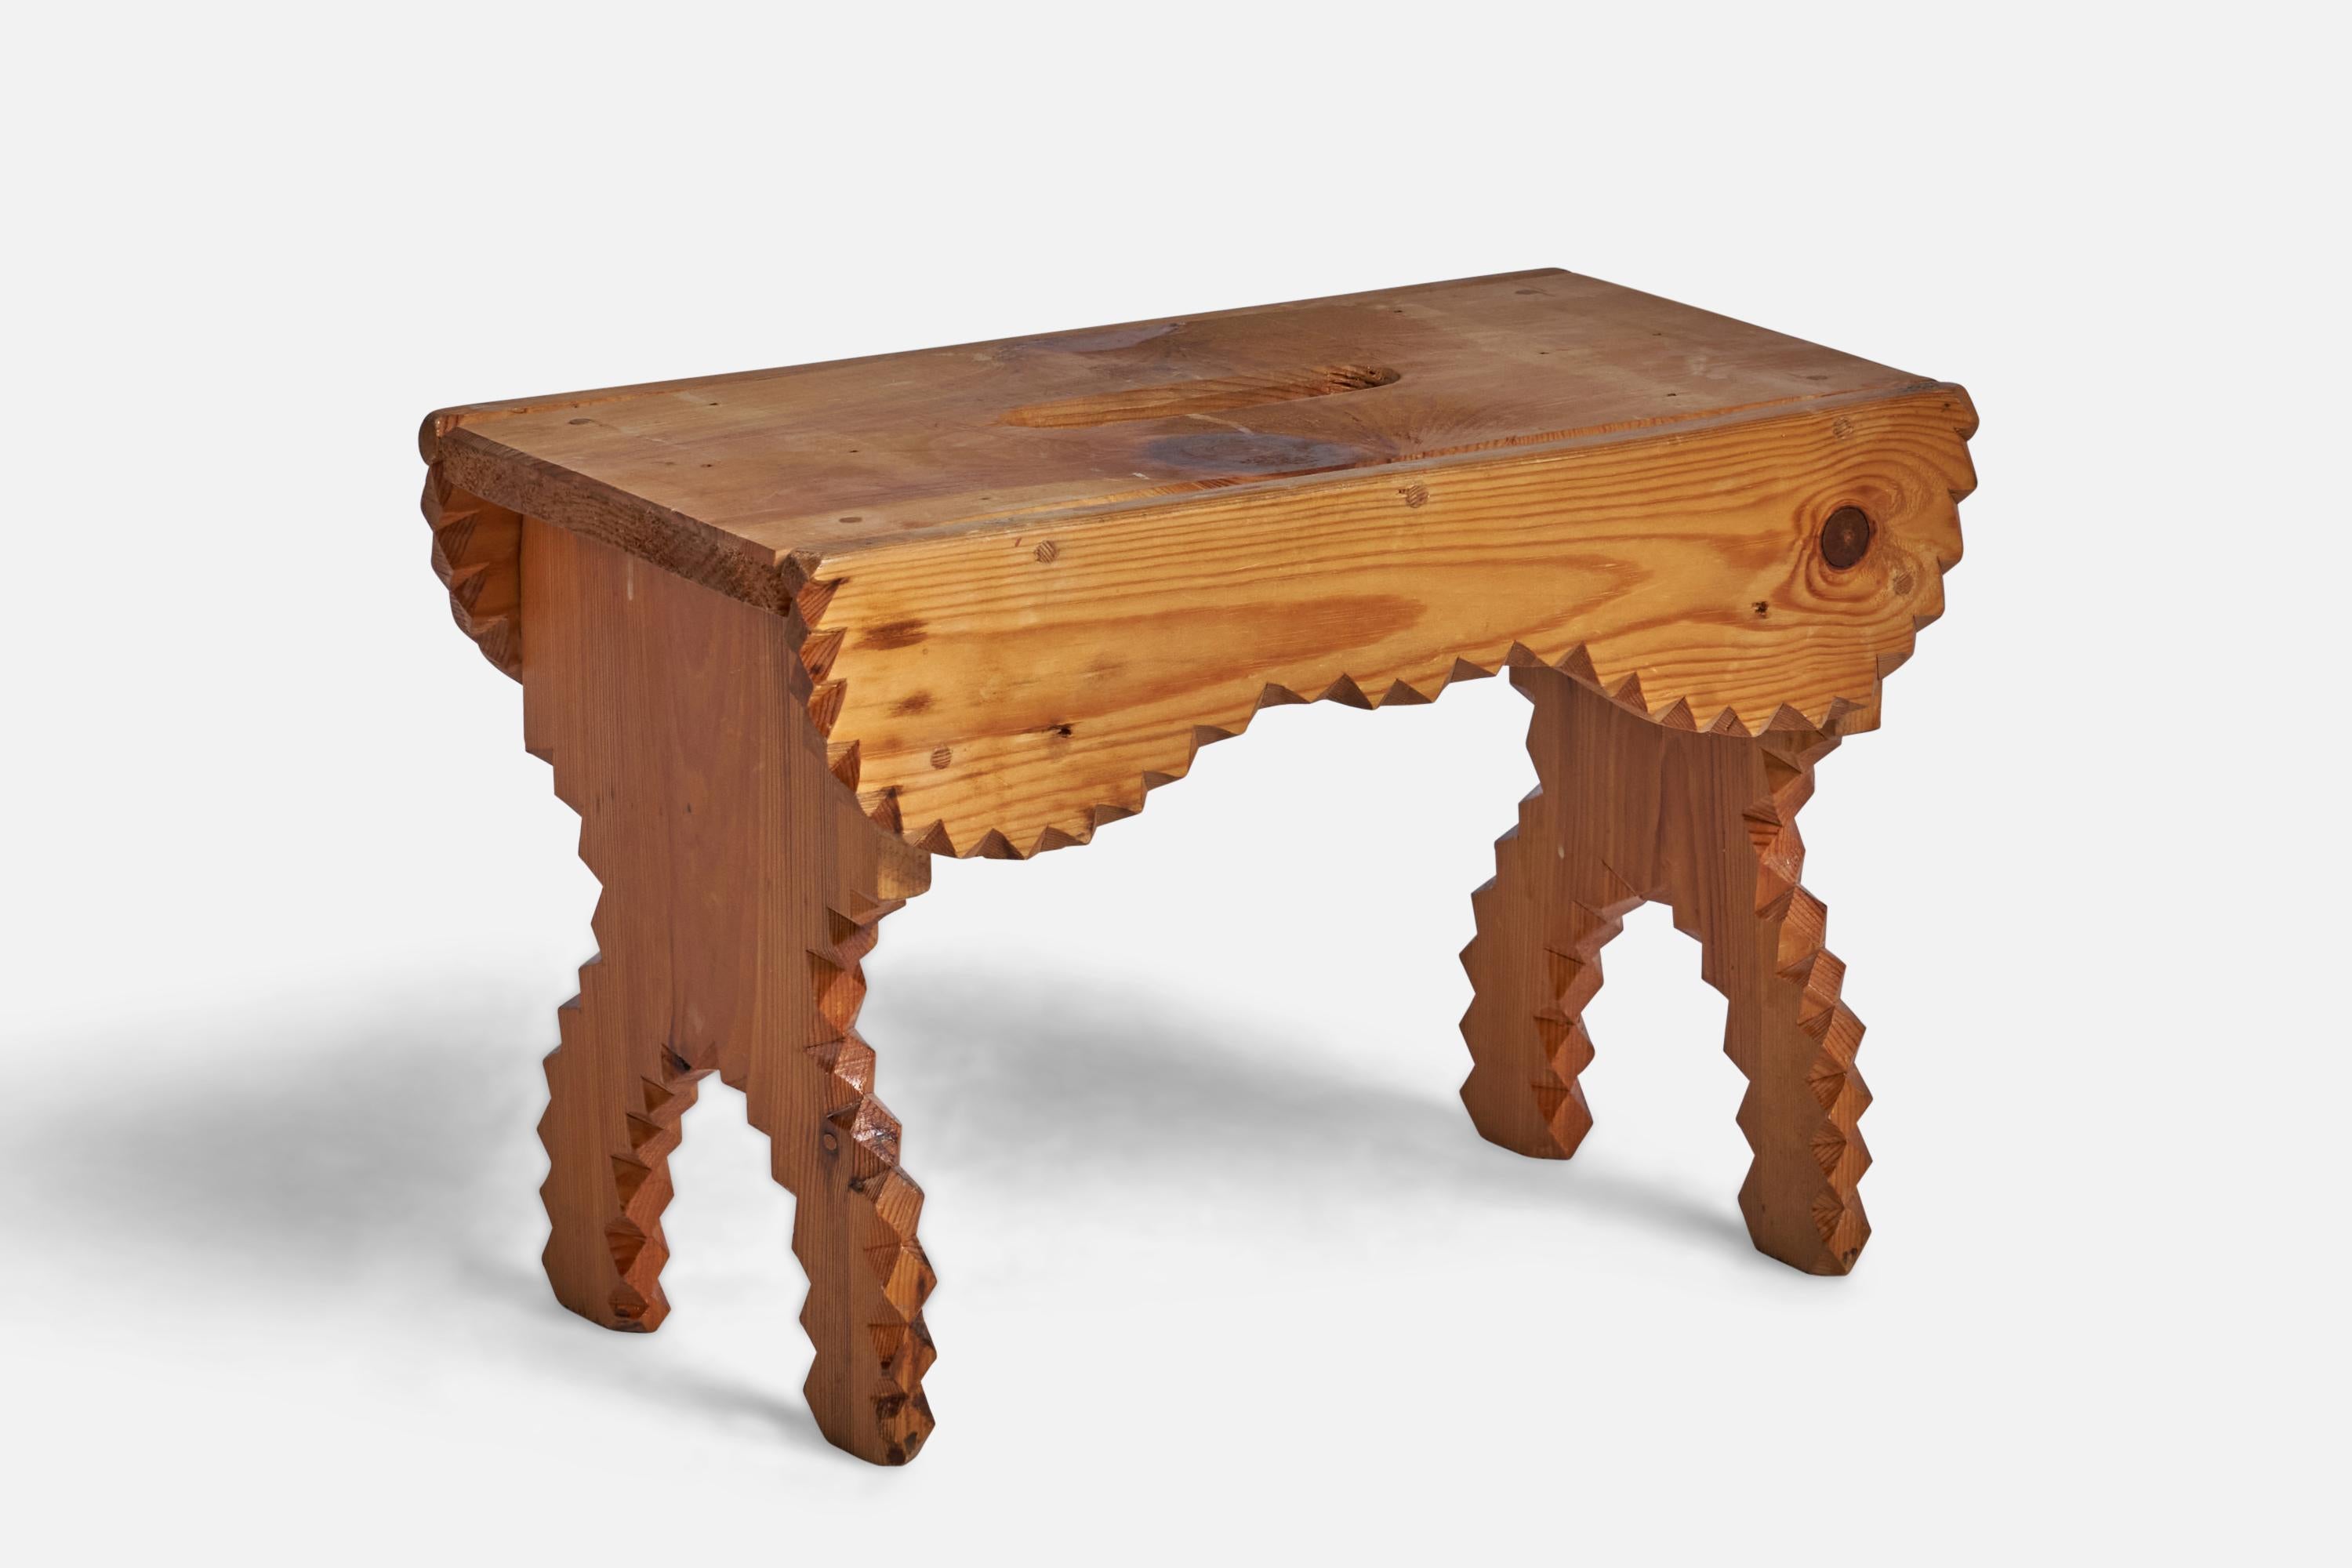 A pine stool designed and produced in Sweden, c. 1960s.